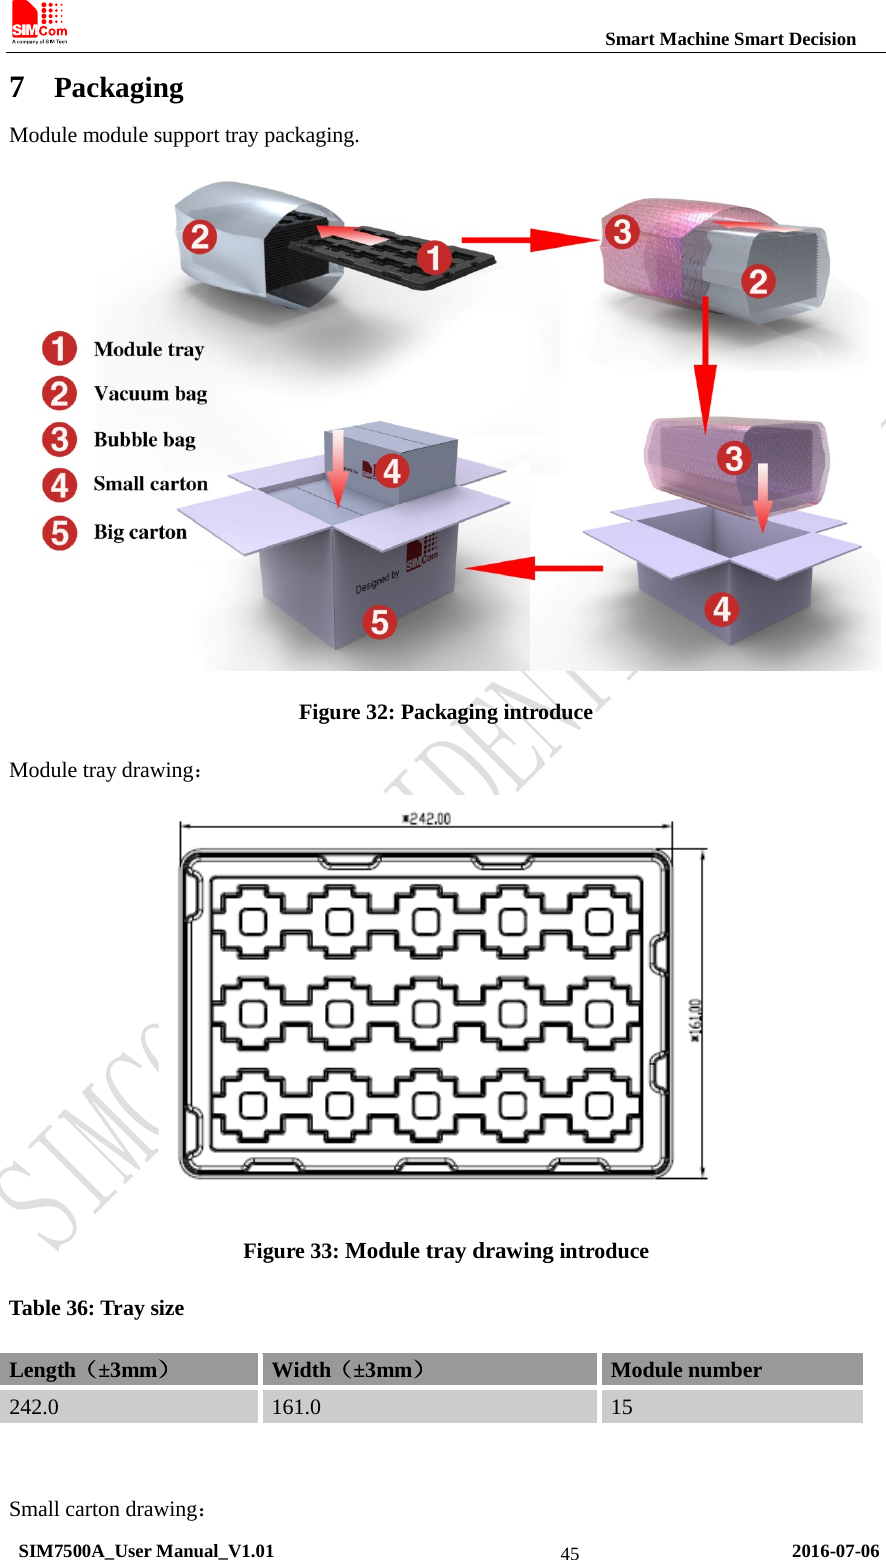                                                          Smart Machine Smart Decision 7 Packaging Module module support tray packaging.  Figure 32: Packaging introduce Module tray drawing：  Figure 33: Module tray drawing introduce Table 36: Tray size Length（±3mm） Width（±3mm） Module number 242.0  161.0  15   Small carton drawing：  SIM7500A_User Manual_V1.01                                                       2016-07-06 45 